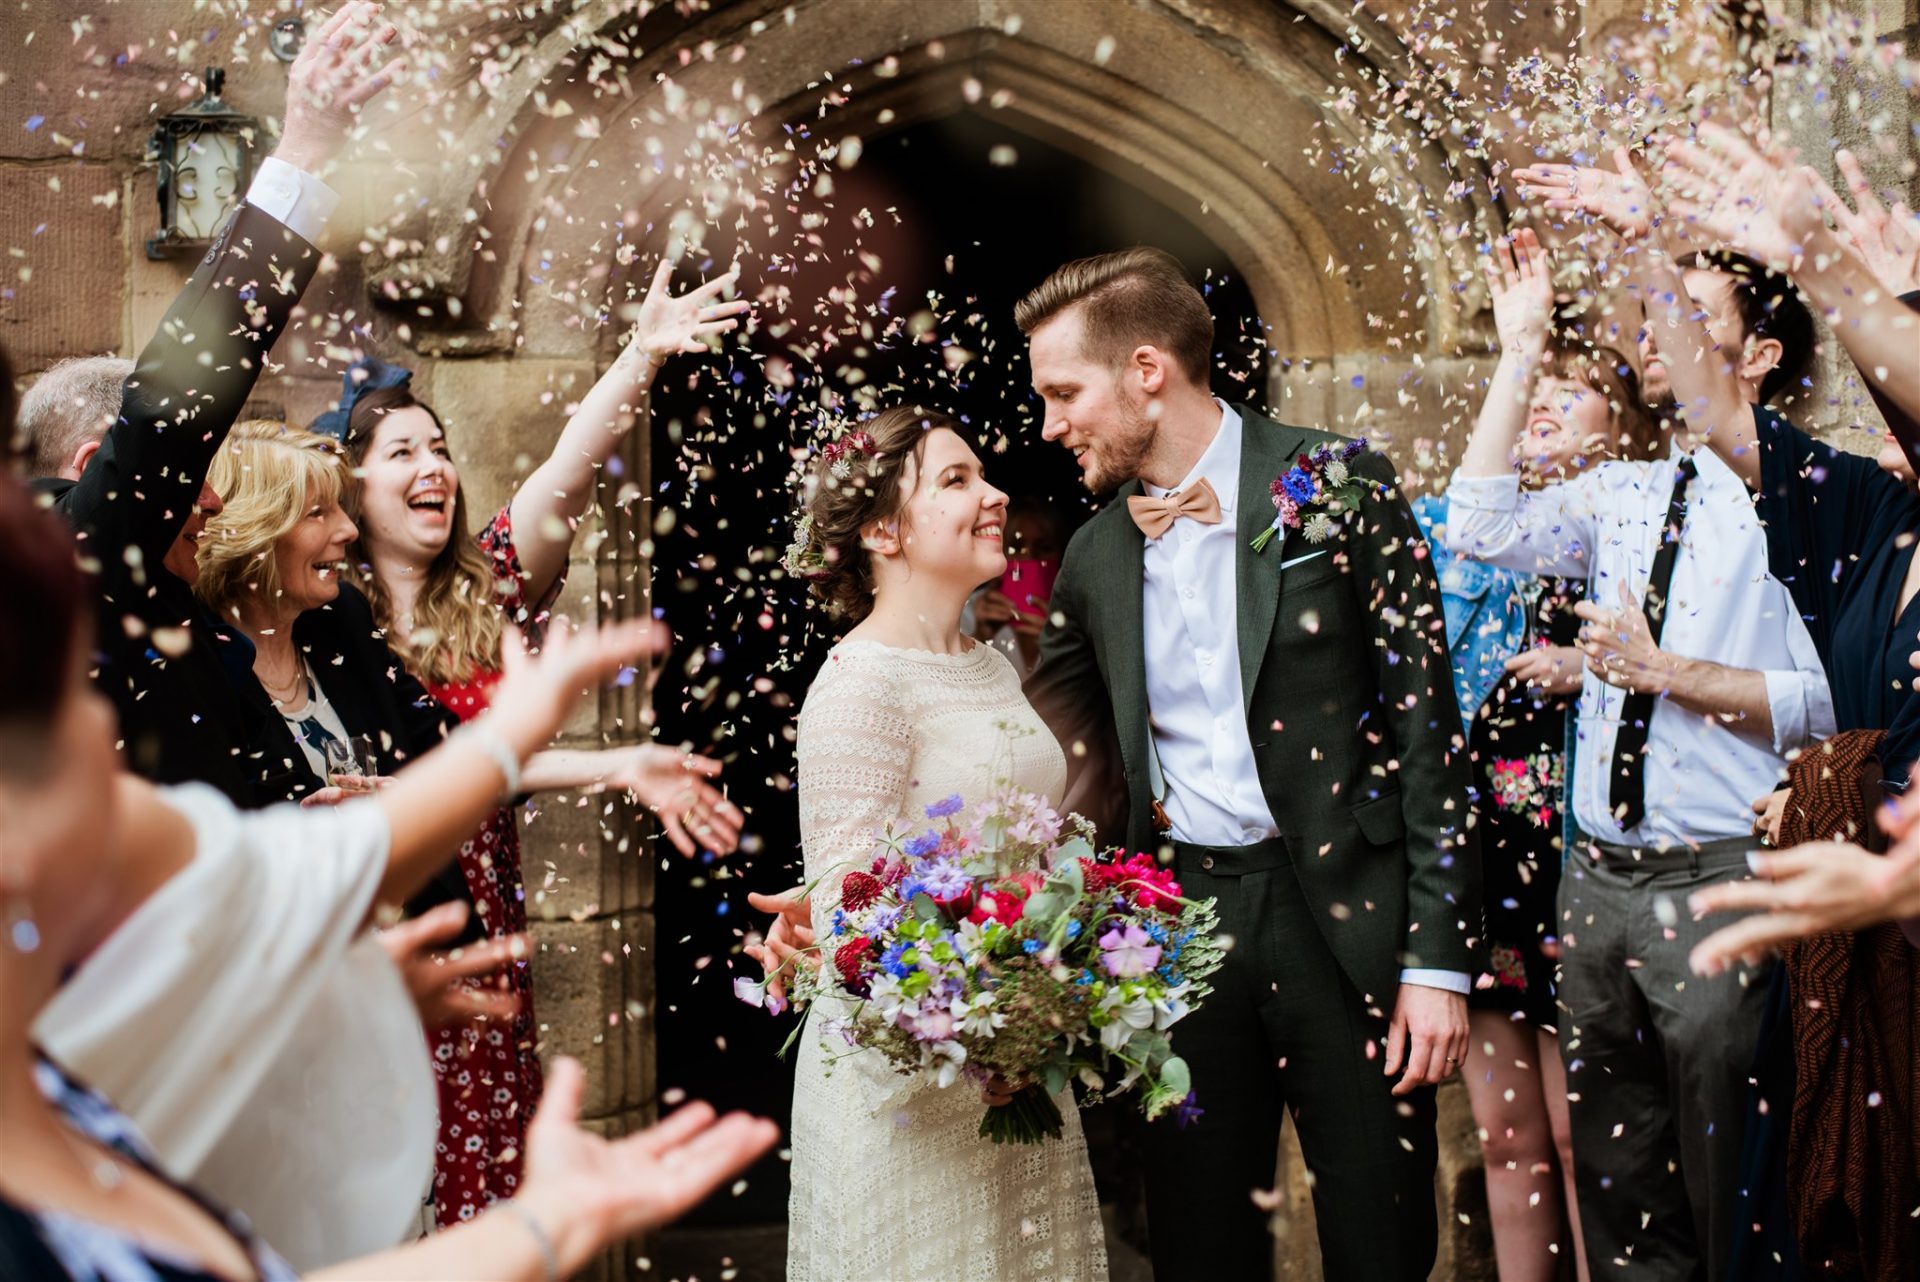 A photo of Matt and Ine leaving Chetham's Library down a tunnel of friends and confetti